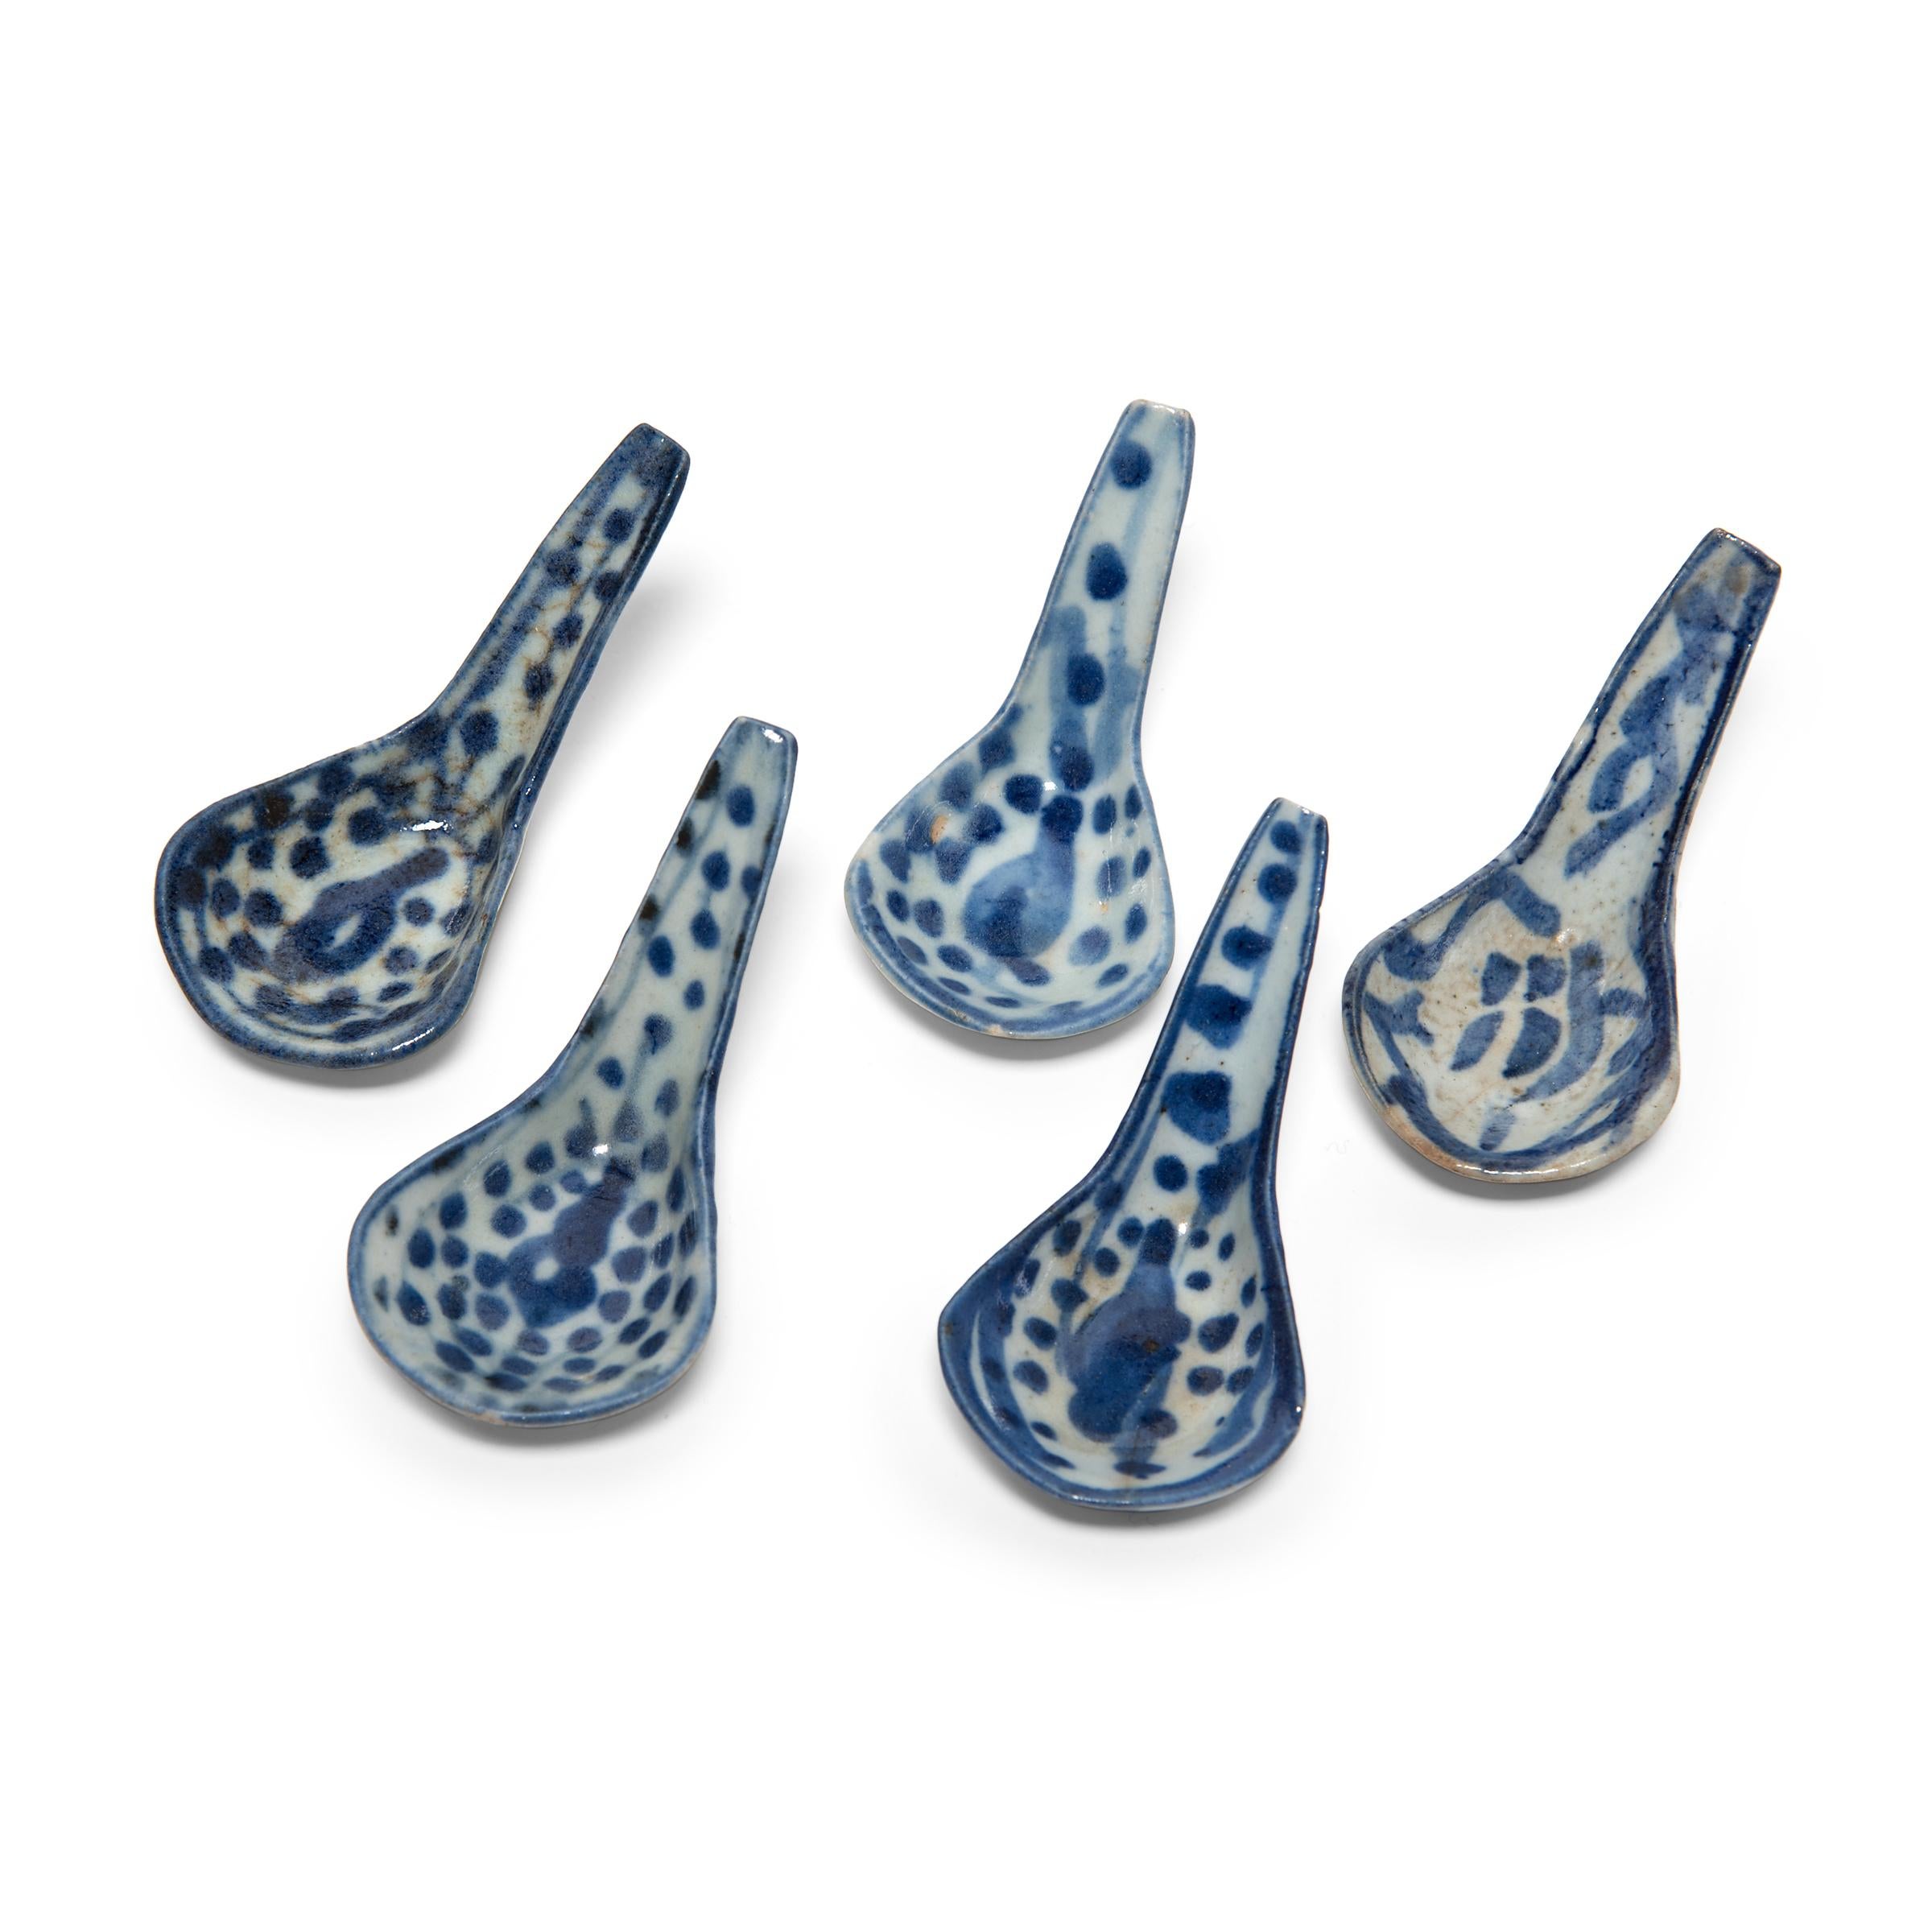 Each a delicate example of blue and white ceramics, these 19th century porcelain soup spoons were likely used as everyday eating utensils. Used in China as early as the Shang dynasty (1600-1046 B.C.), spoons predated chopsticks and remained the most